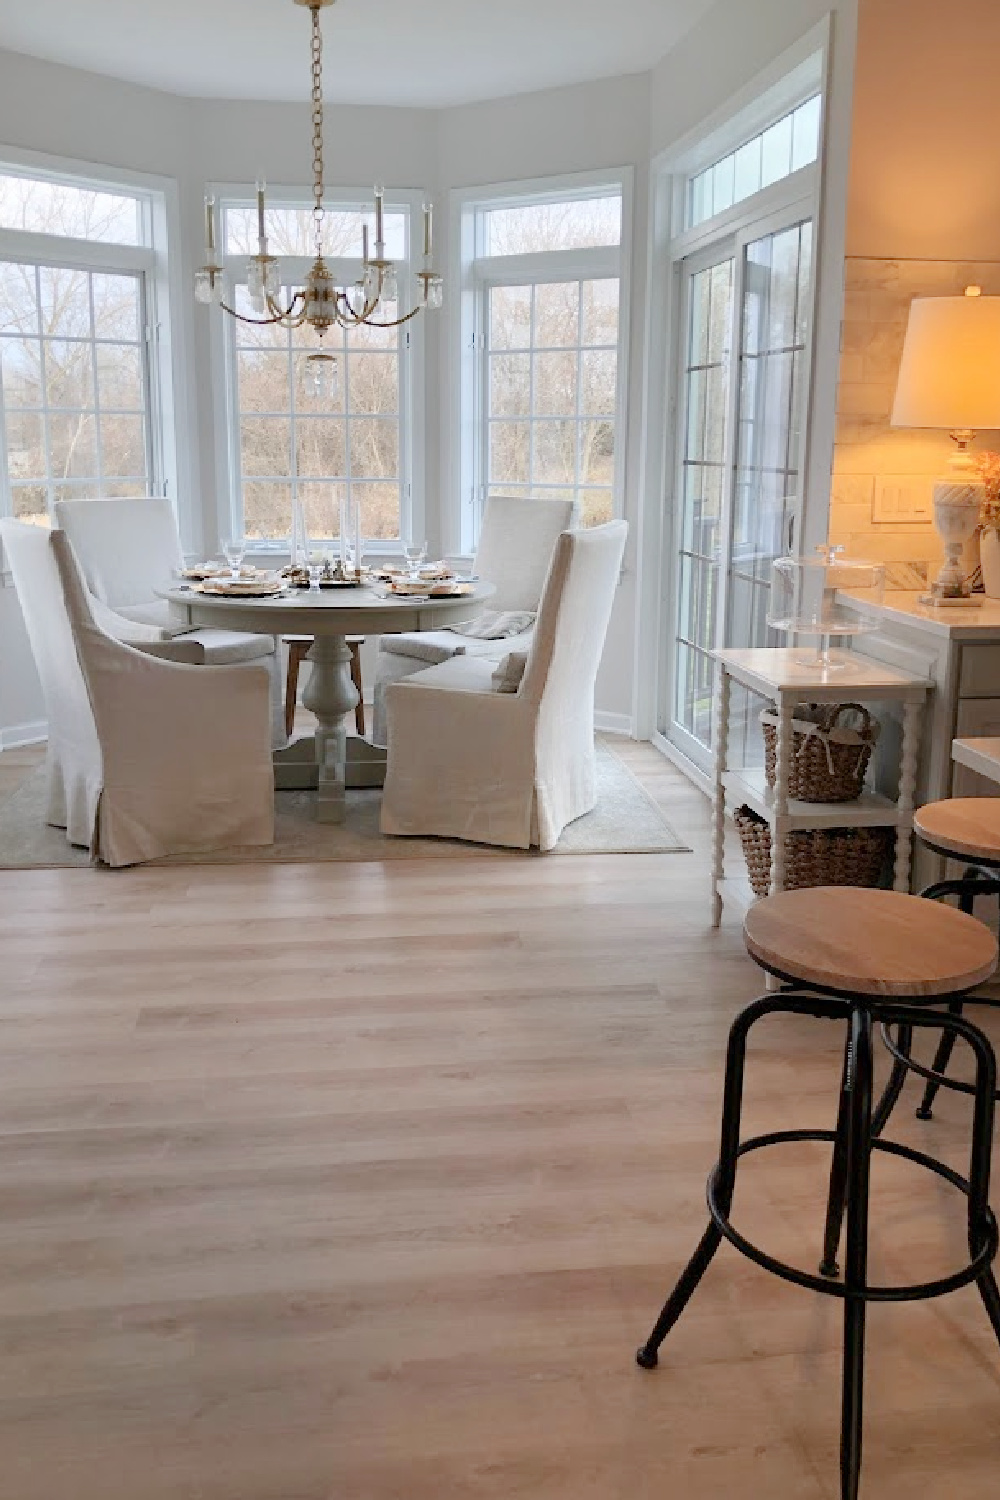 Breakfast nook with gilded chandelier and bay of windows in our renovated kitchen - Hello Lovely Studio.